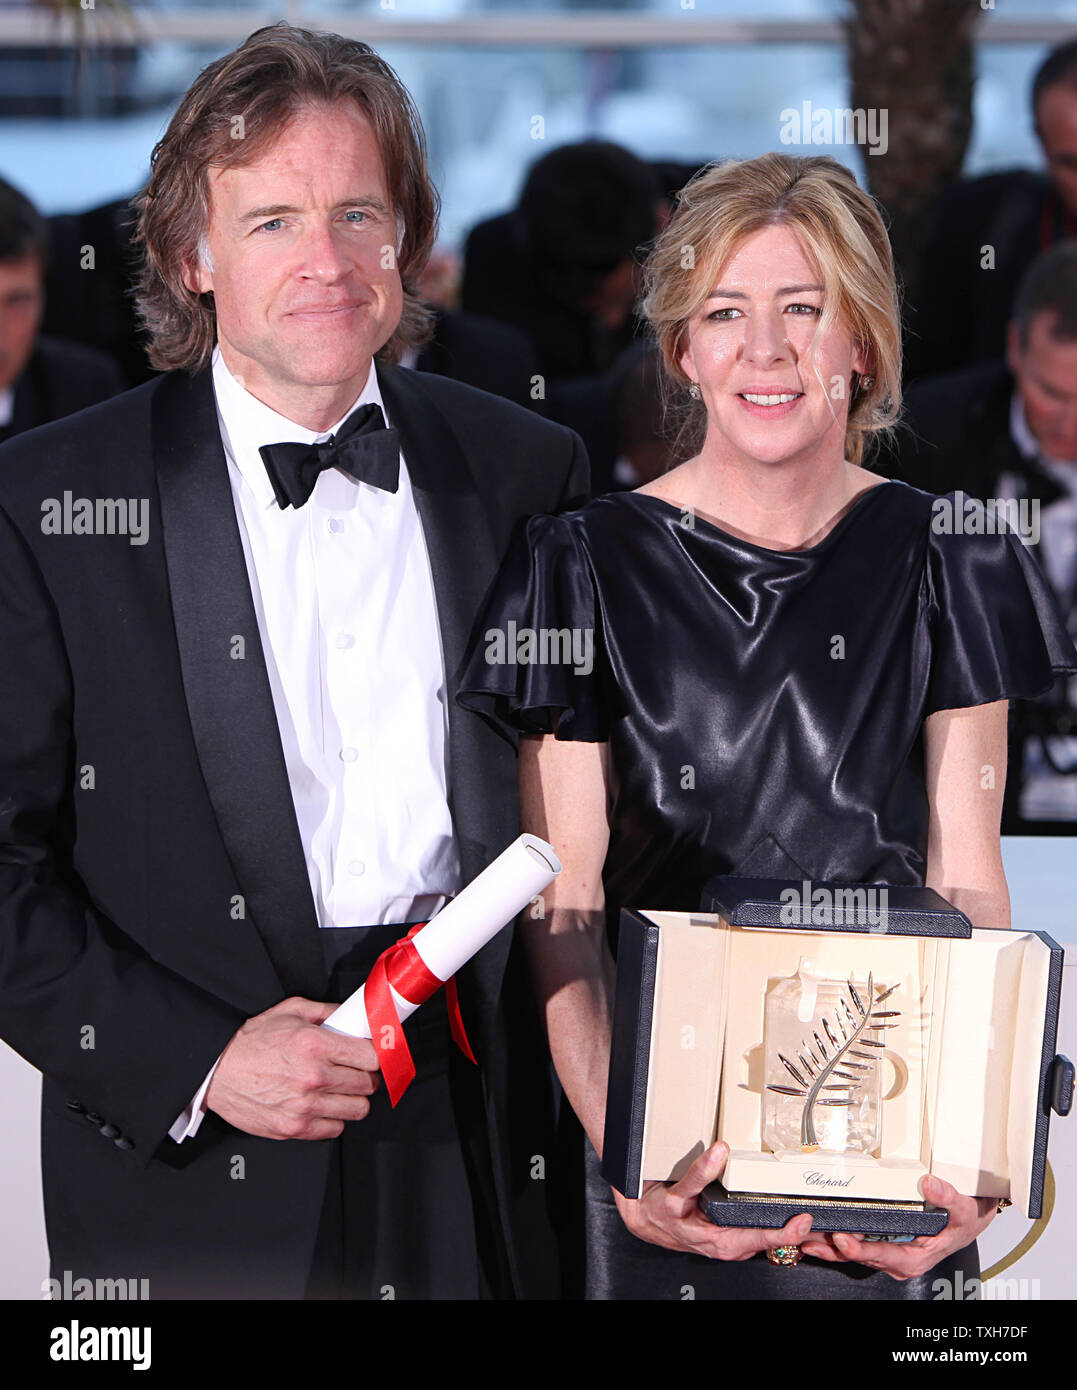 Bill Pohlad (L) and Dede Gardner arrive at the award photocall after receiving the "Palme d'Or" top prize for the film "The Tree of Life" during the 64th annual Cannes International Film Festival in Cannes, France on May 22, 2011.  Terrence Malick, who directed the film, was not present.   UPI/David Silpa Stock Photo